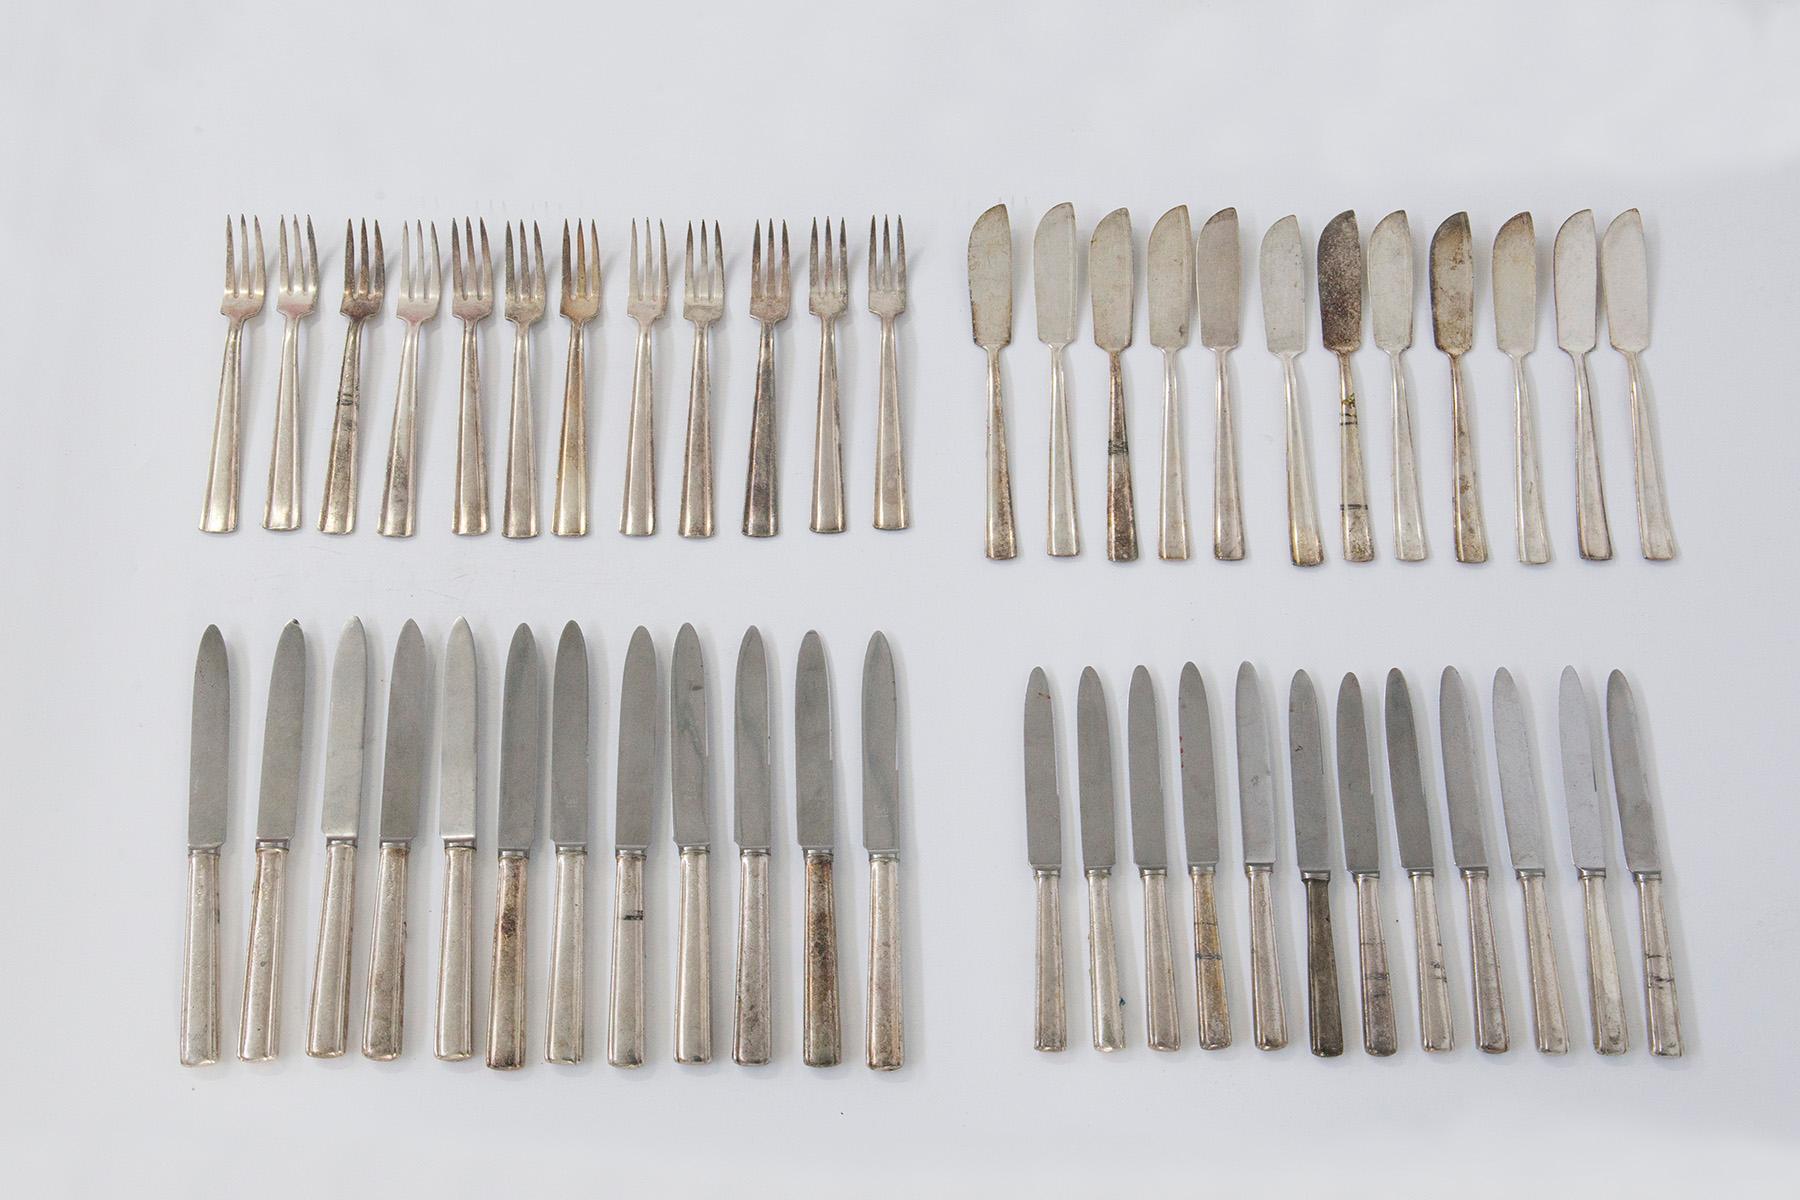 Silver-plated metal cutlery set designed by Gio Ponti for Manifattura Krupp Milan. The set has a total of 48 pieces and is composed as follows: Twelve three-pronged forks, twelve tall serving knives, twelve fish knives, twelve dessert knives. The